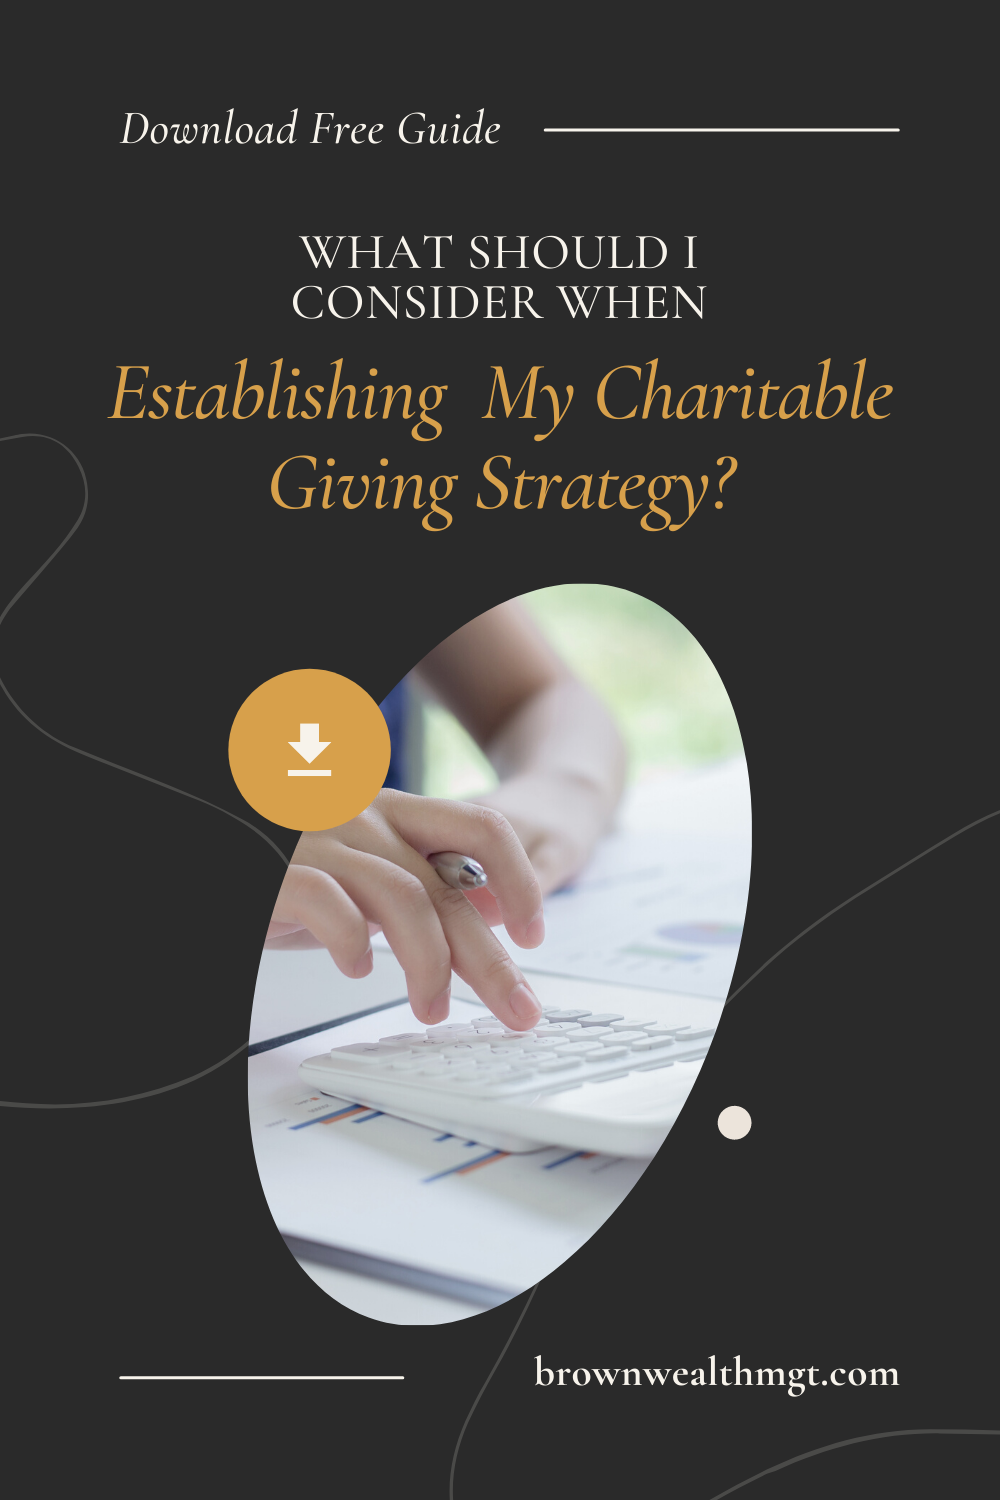 What should I consider when establishing my charitable giving strategy?